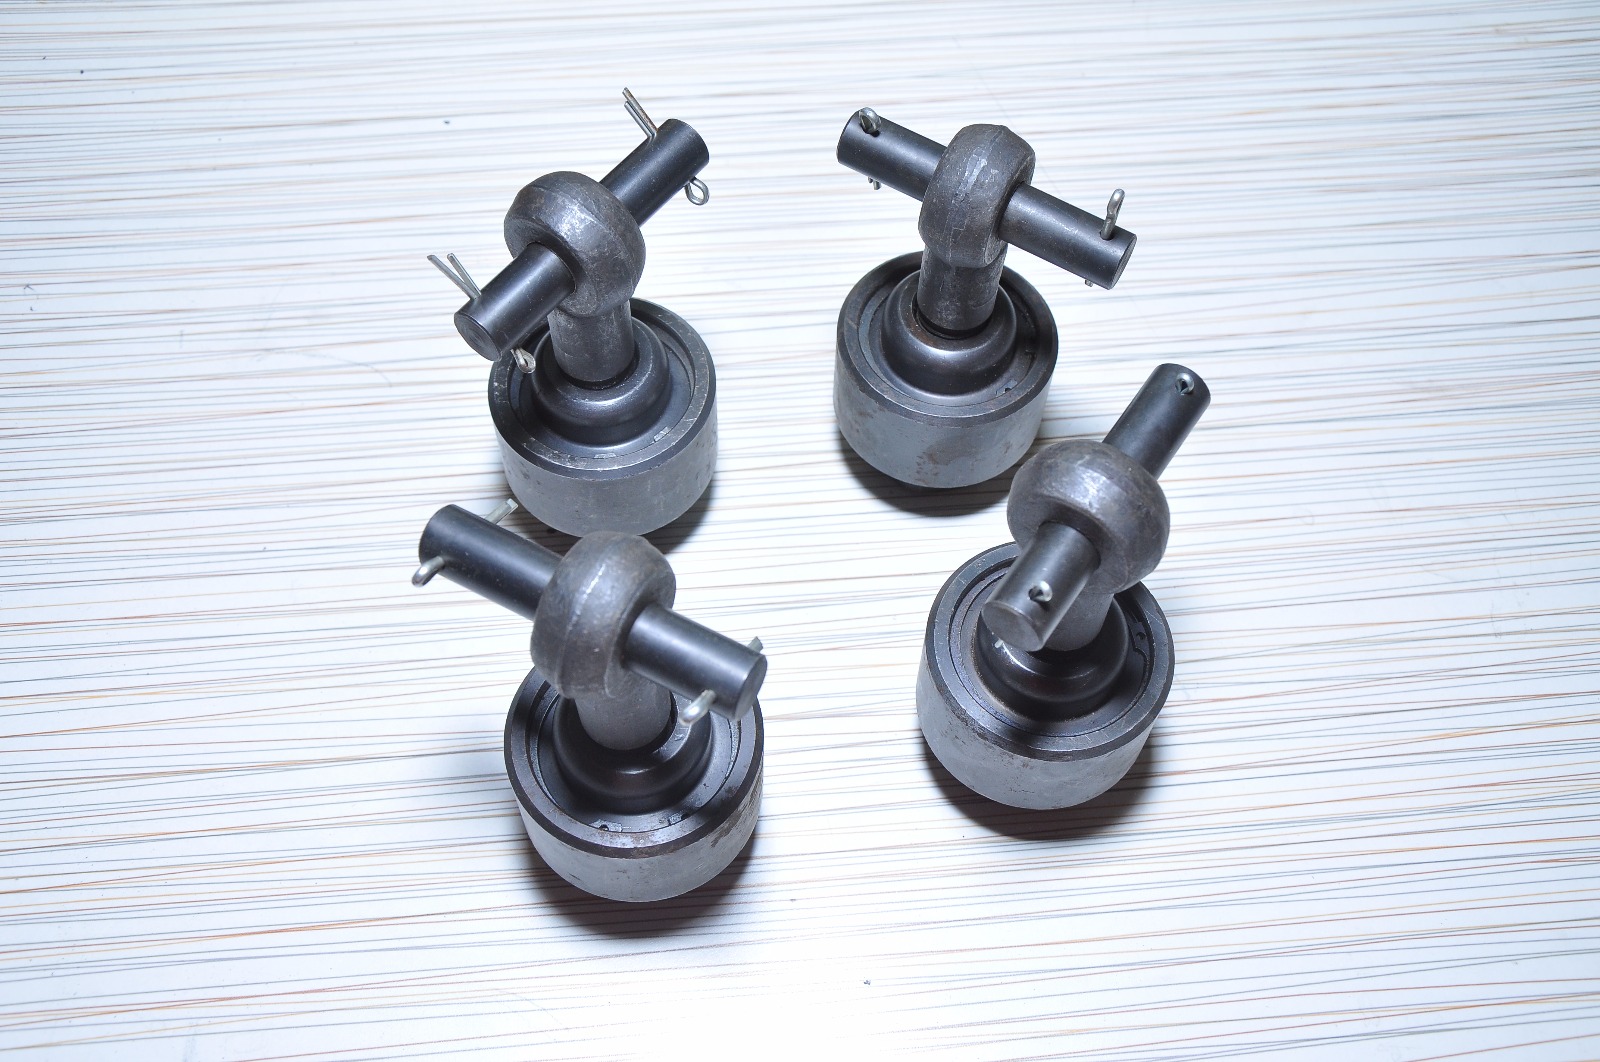 HEAT COMPENSATING NUT AND EYE BOLTS MANUFACTURERS IN HYDERABAD